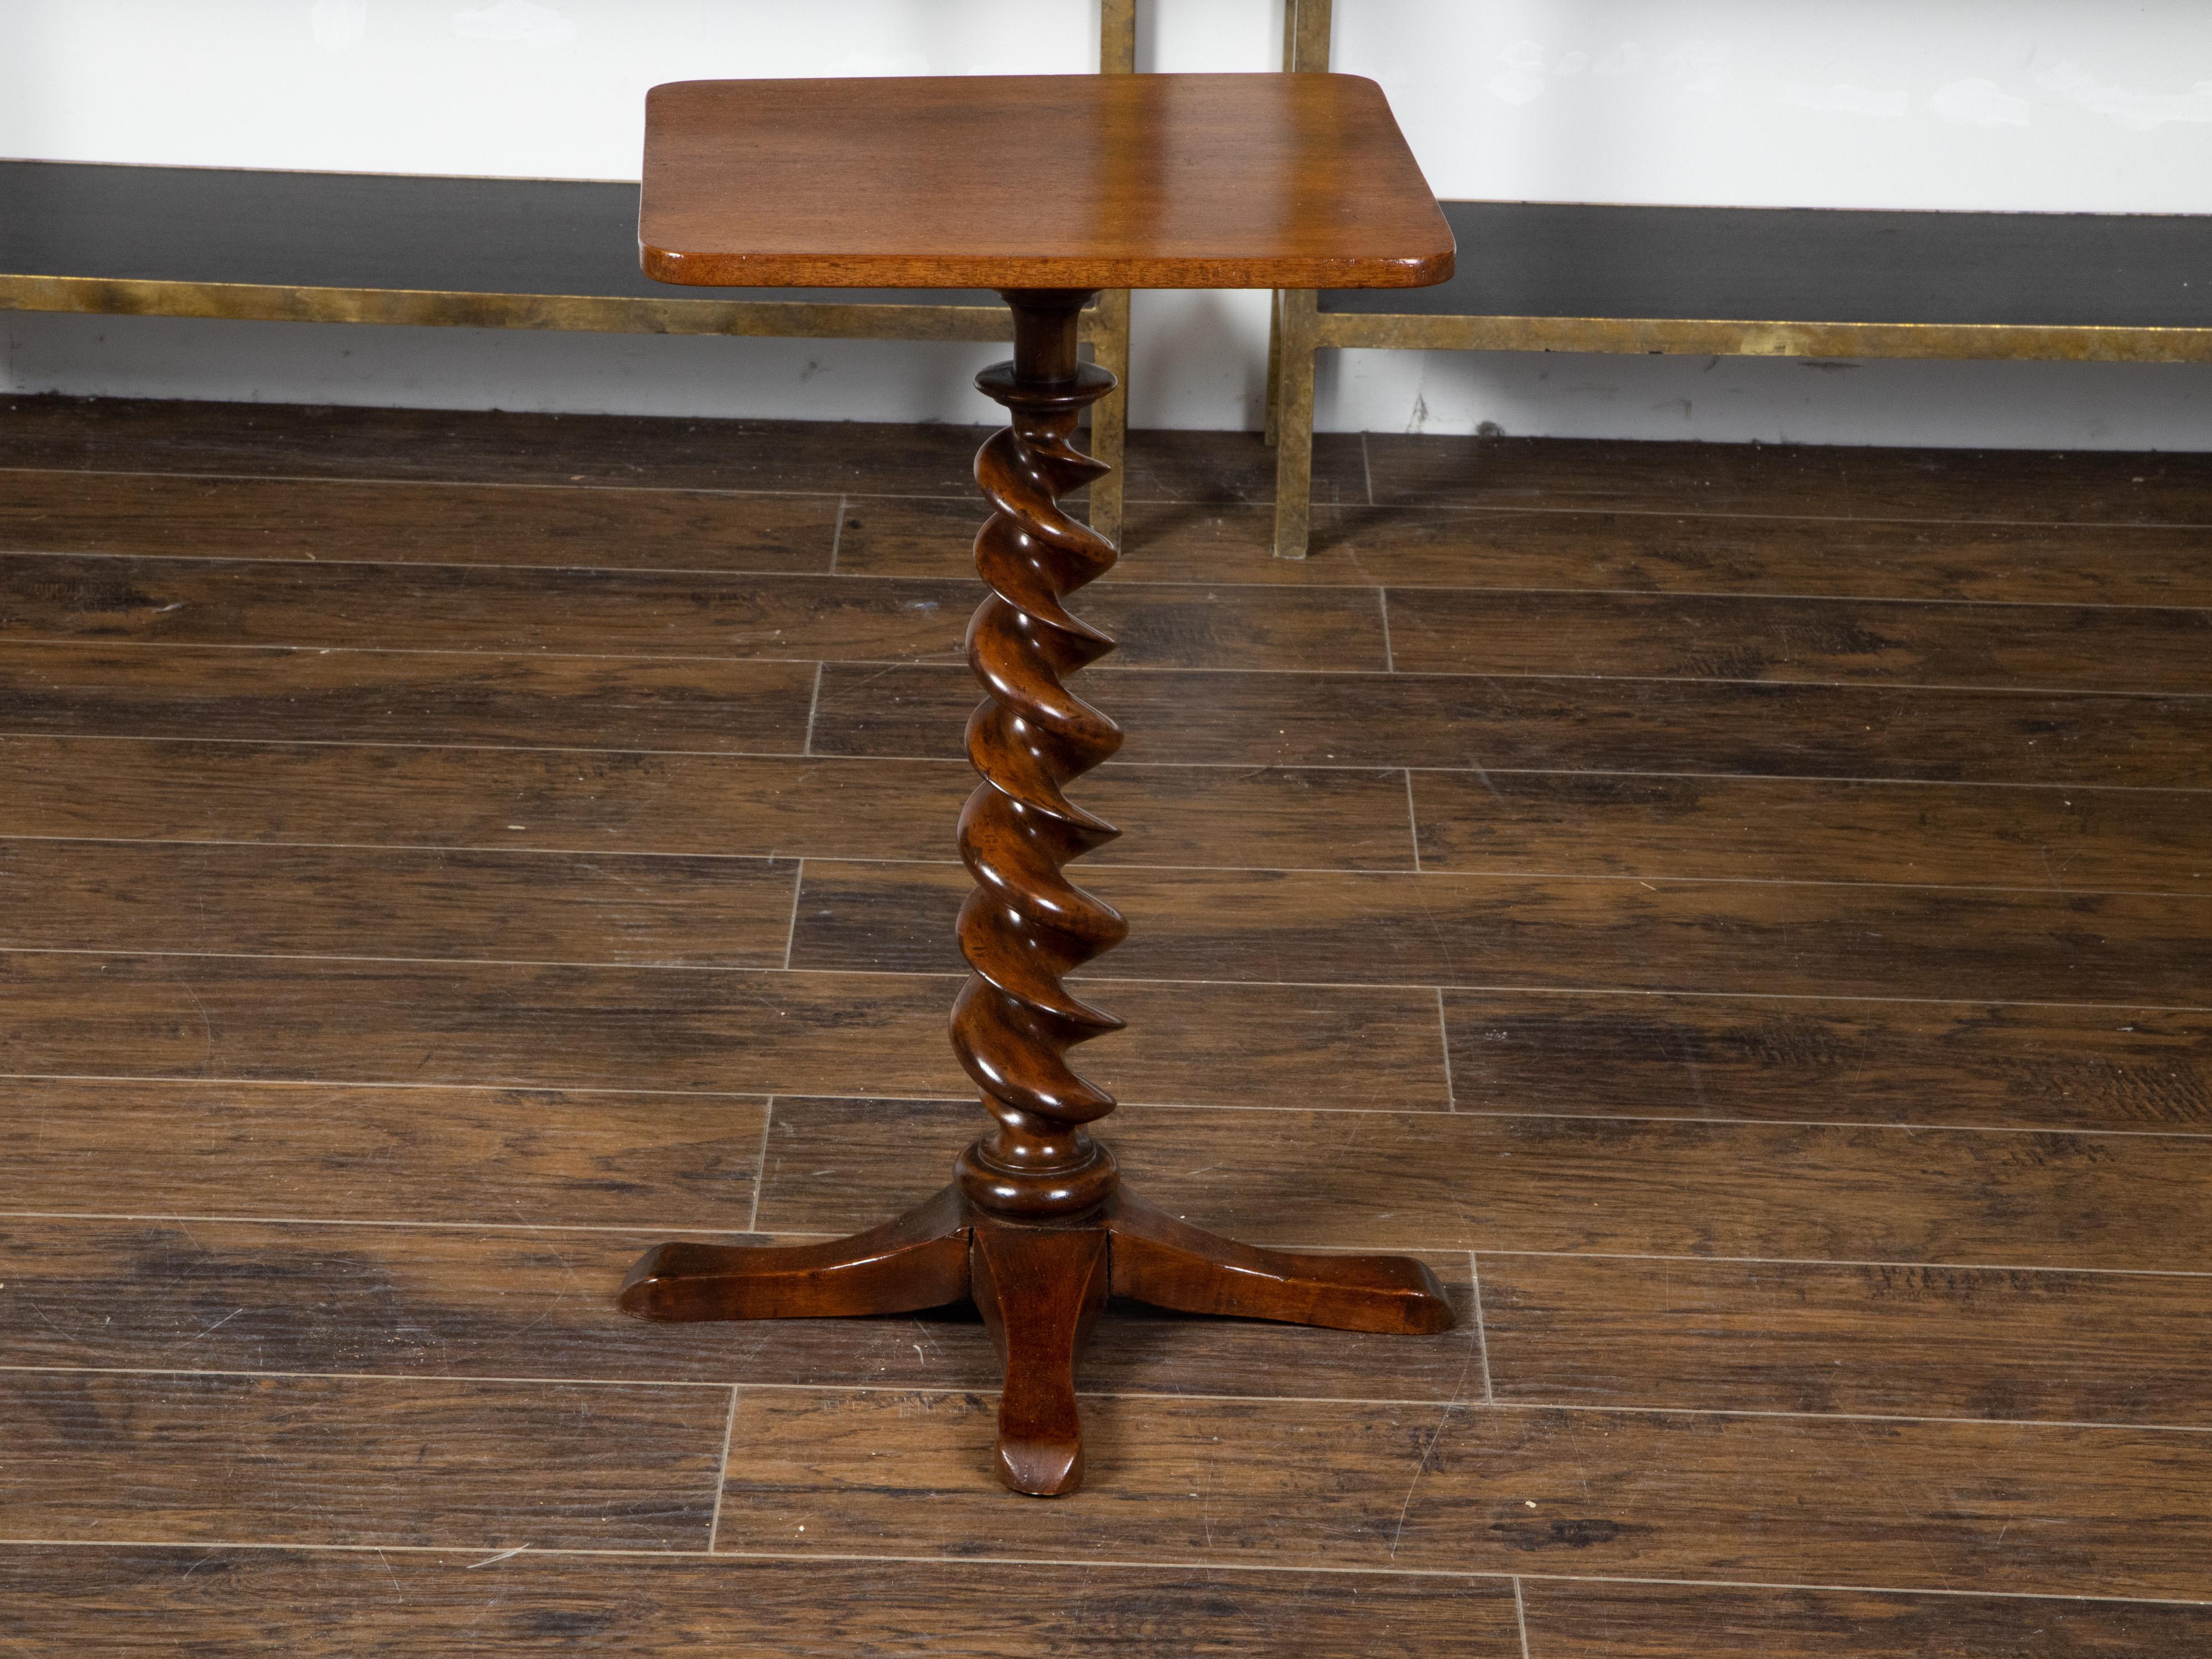 An English mahogany side table from the 19th century, with barley twist pedestal and quadripod base. Created in England during the 19th century, this mahogany side table features a square top sitting above a barley twist base resting on four